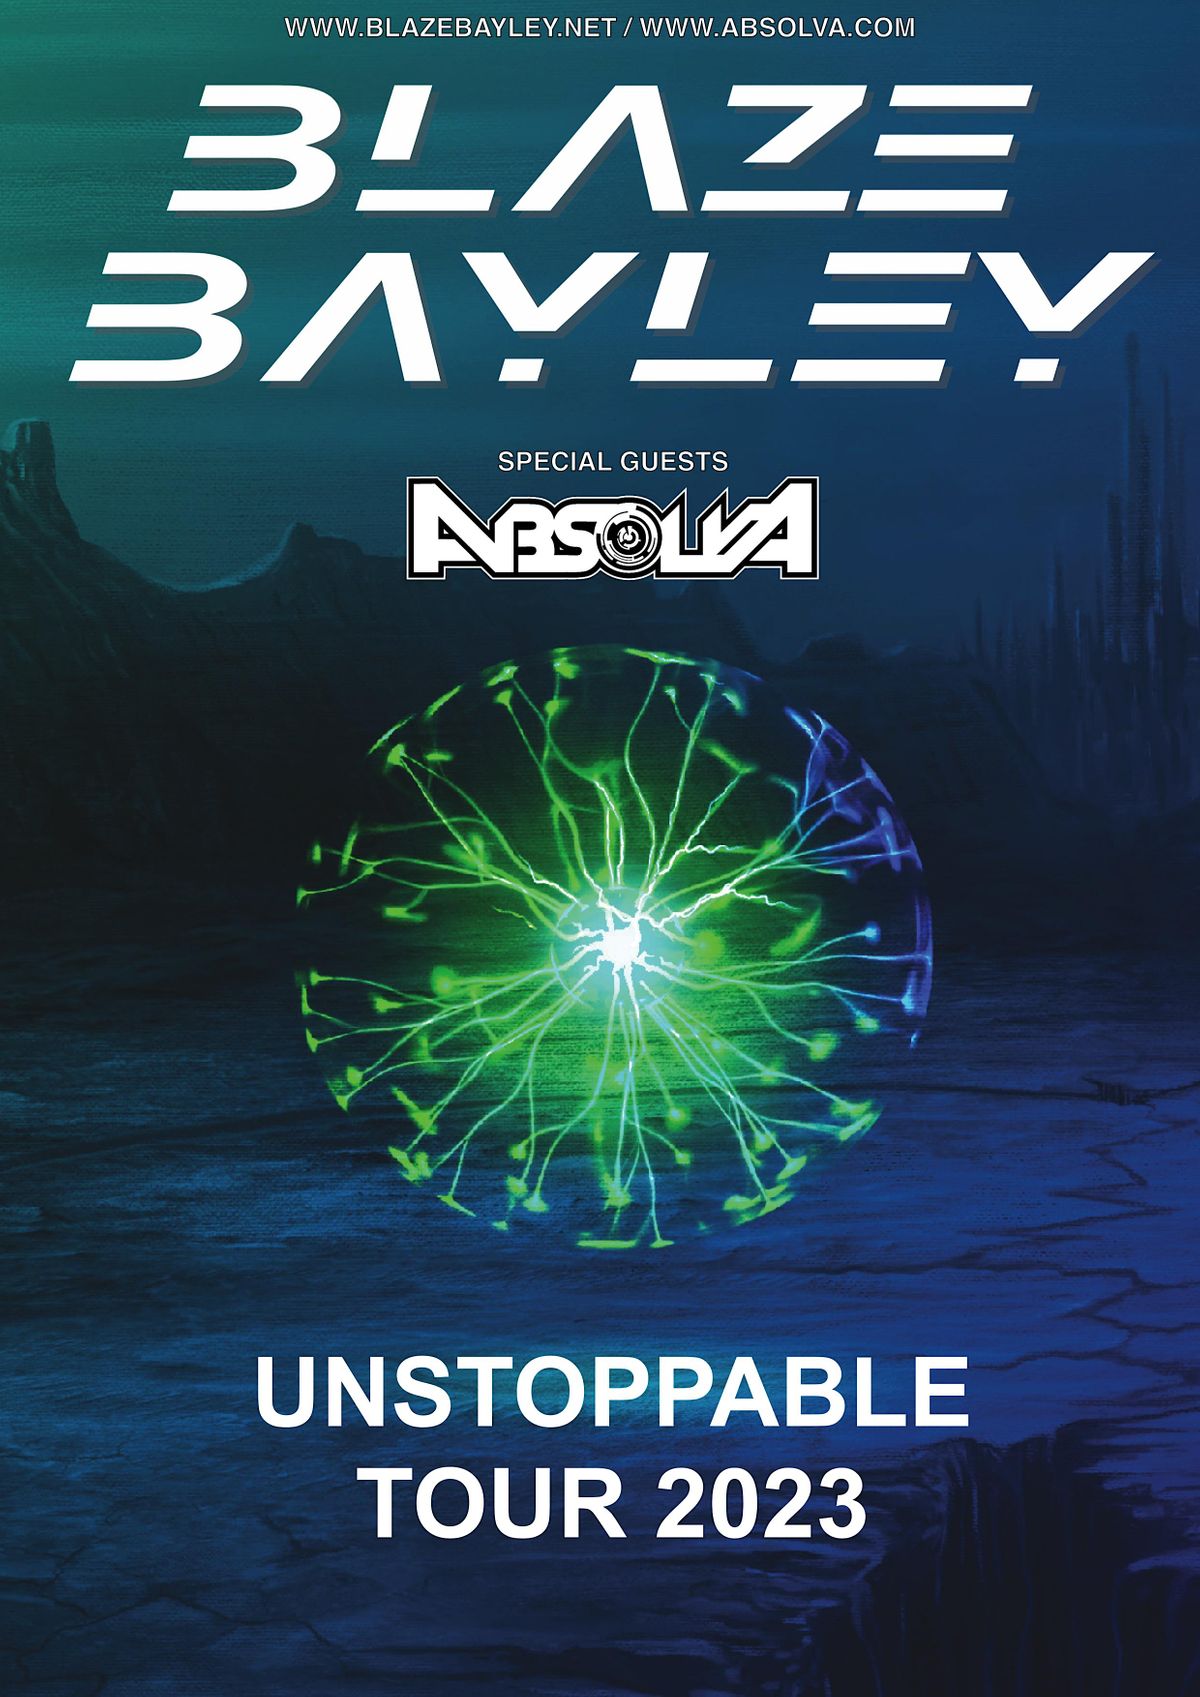 Blaze Bayley - Unstoppable Tour 2024 - Special Guests: Absolva